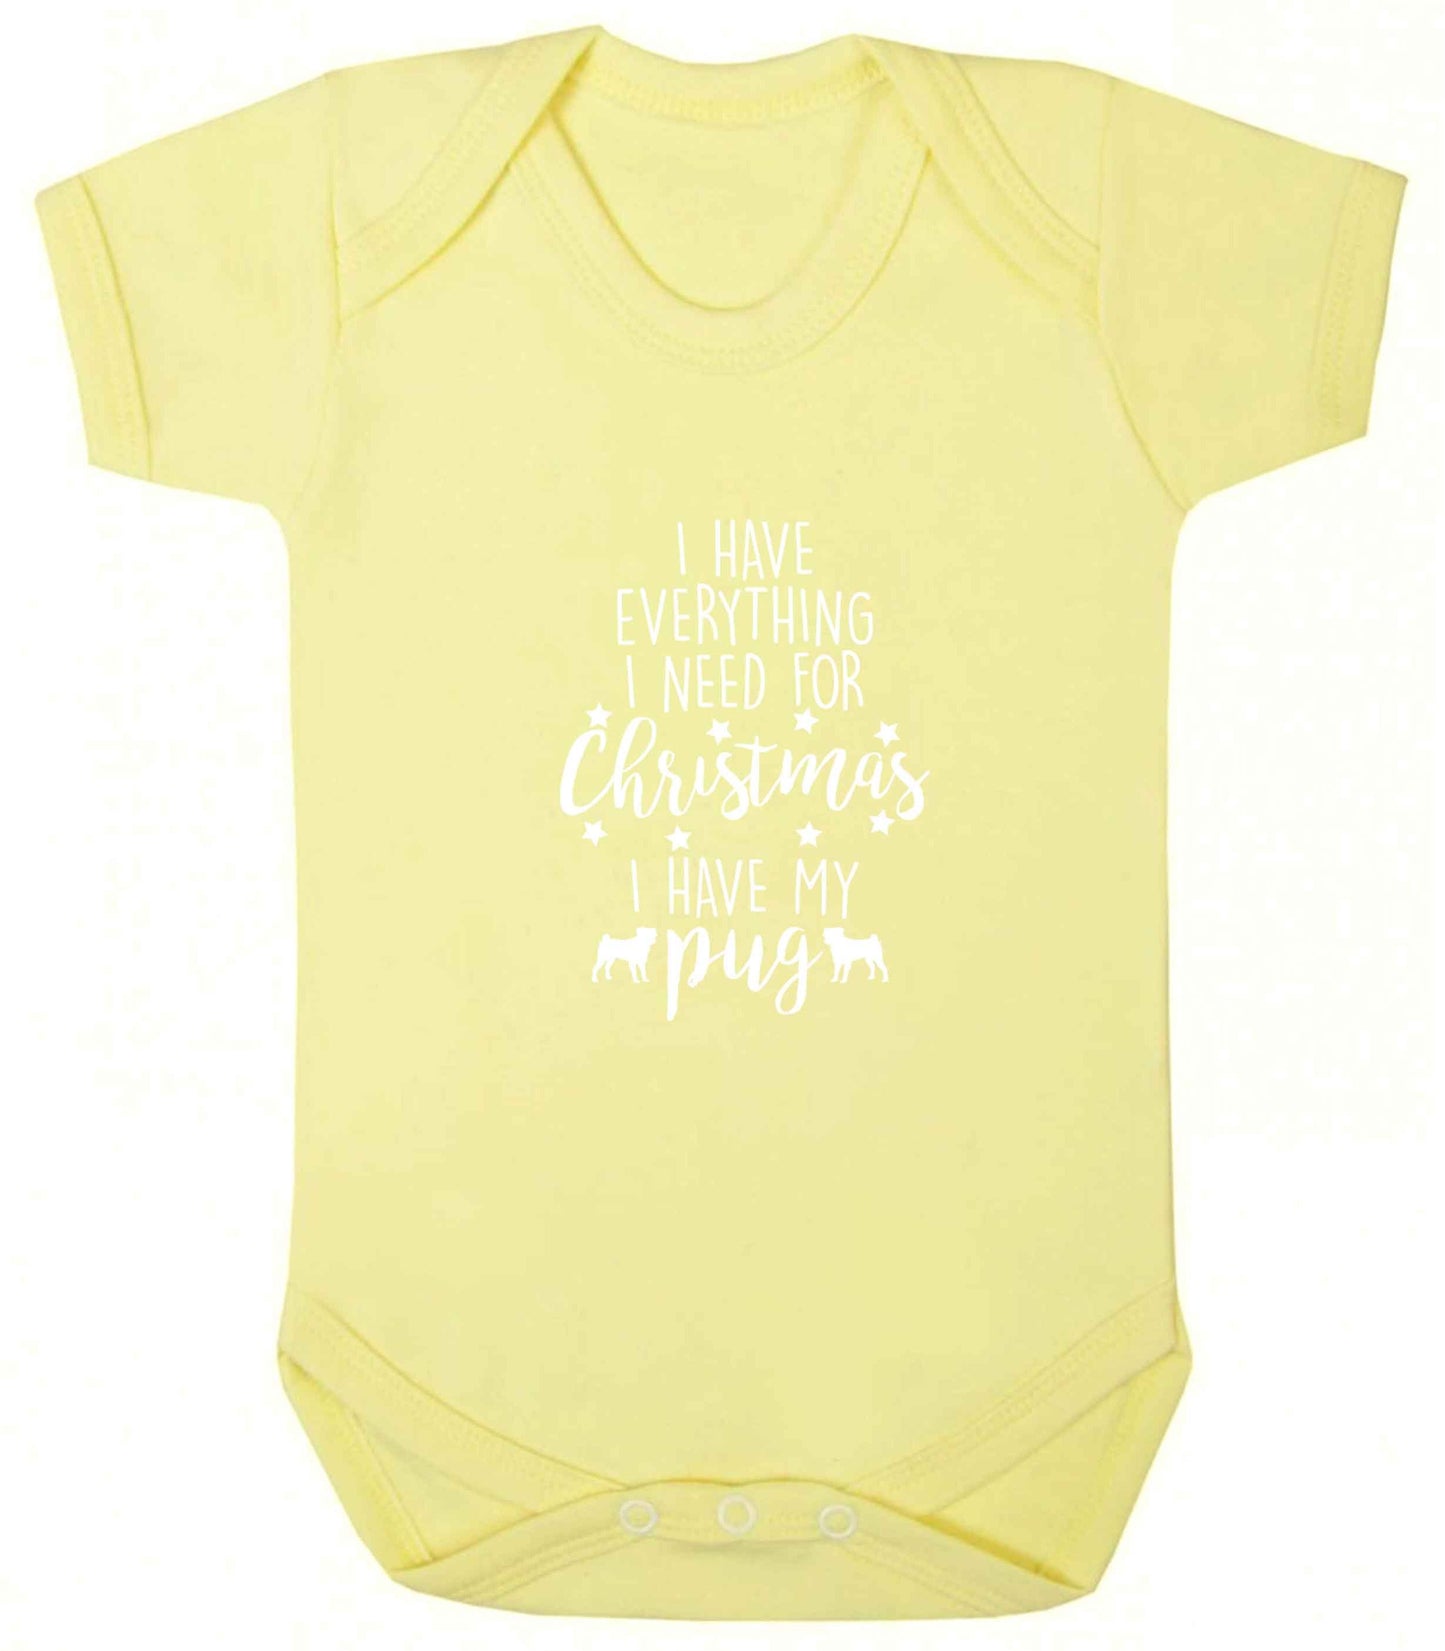 I have everything I need for Christmas I have my pug baby vest pale yellow 18-24 months